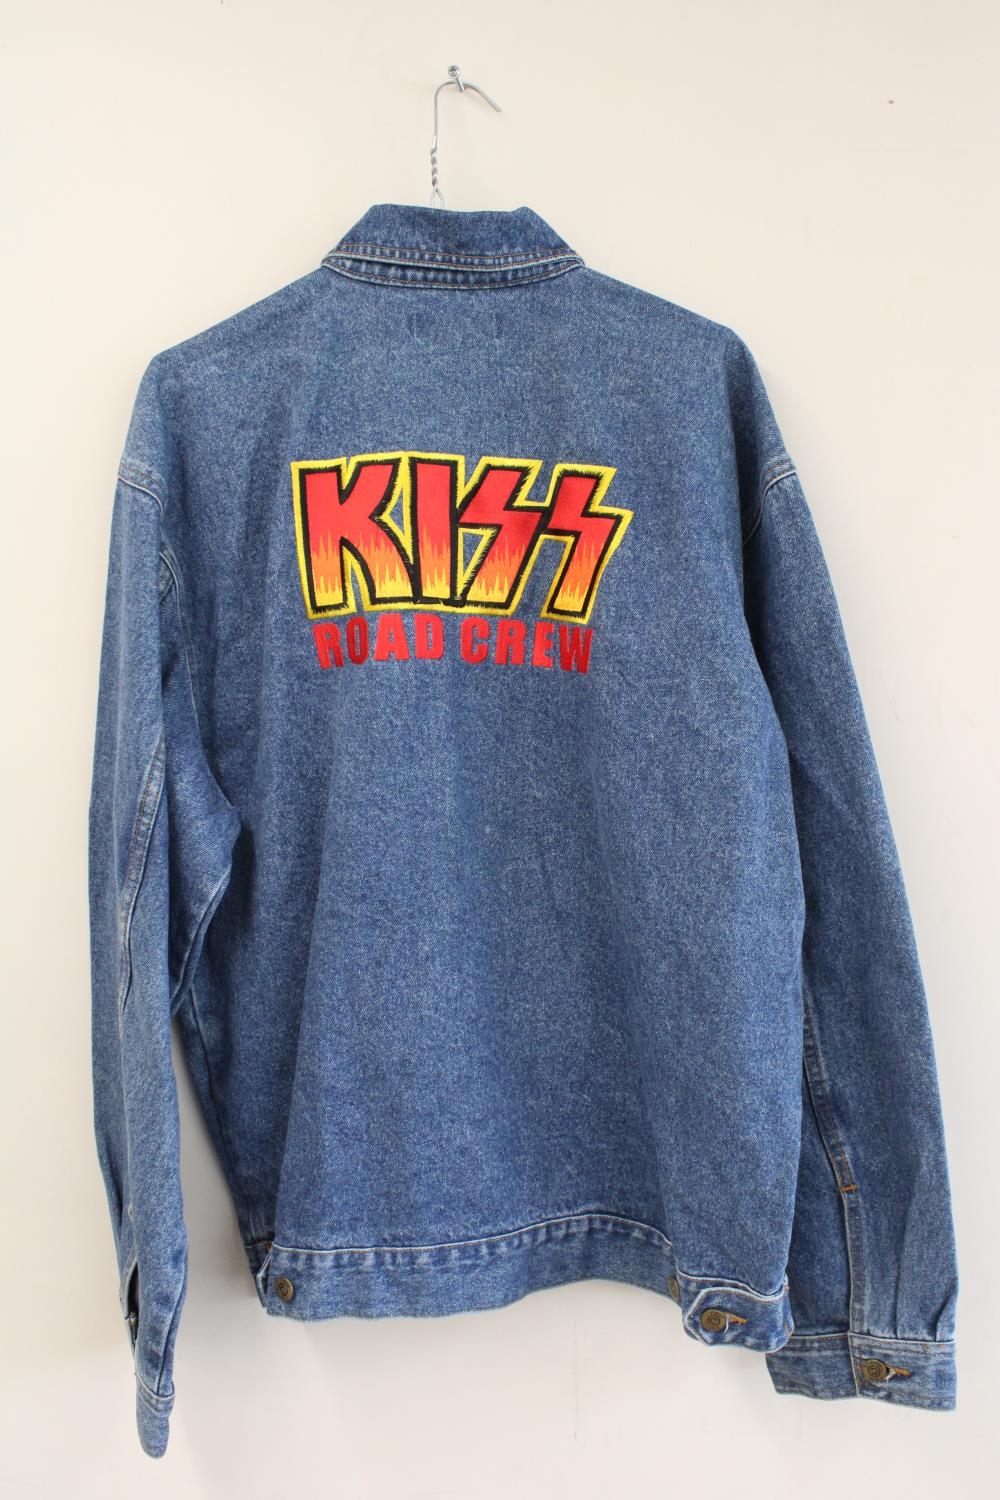 Kiss the Farewell Tour 2000 denim road crew jacket, size L - Image 2 of 2